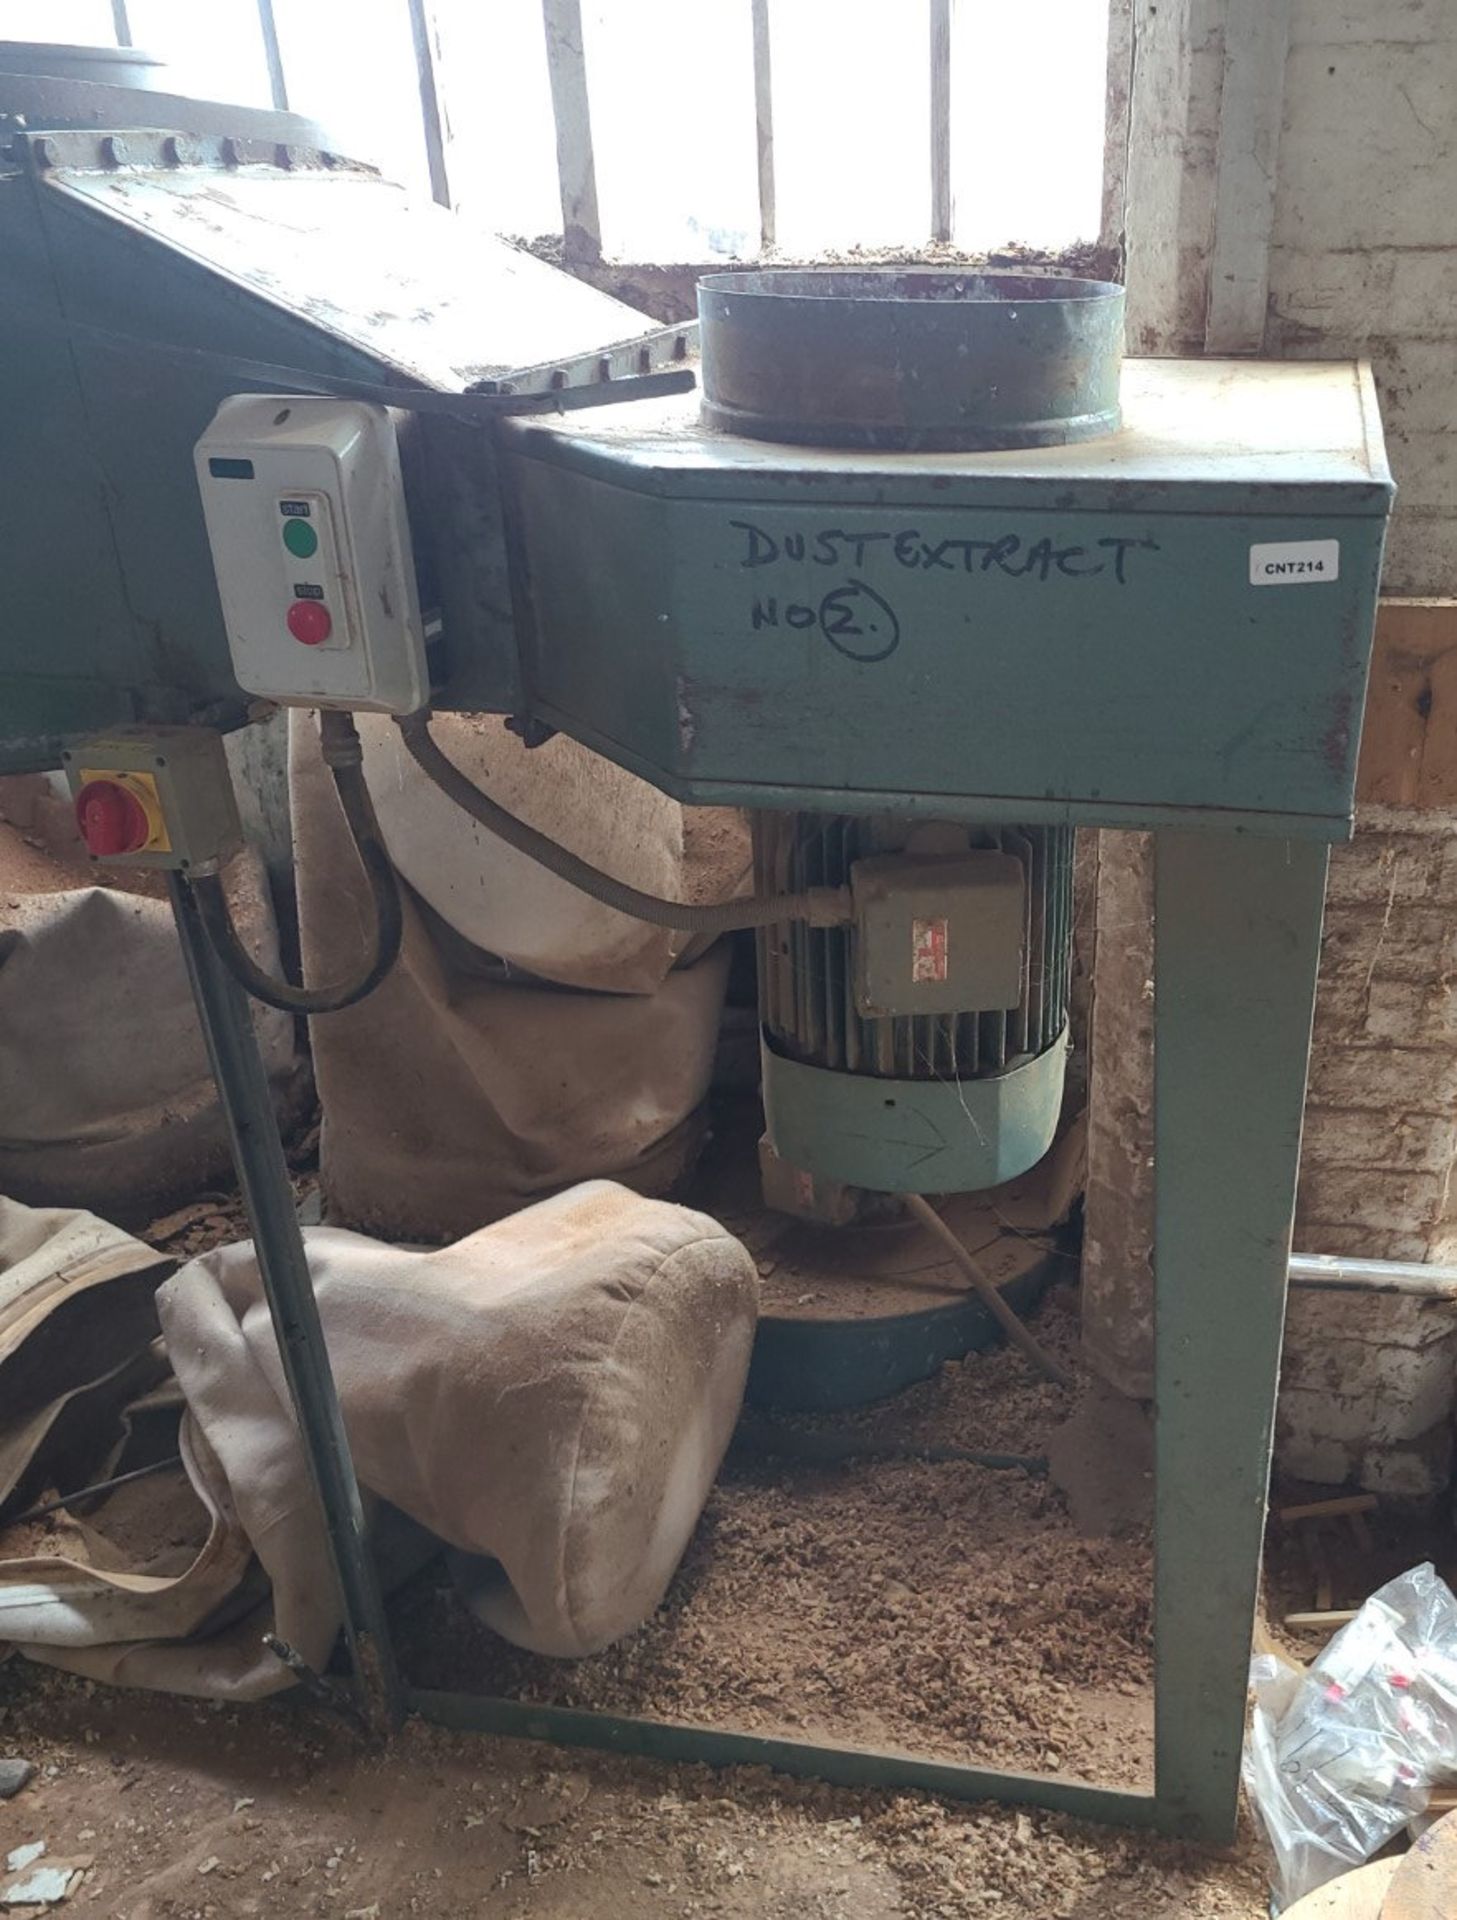 1 x 4-Bag Dust And Wood Waste Extractor/Collector - 3 Phase - Ref: CNT214 - CL846 - Location: Oxford - Image 5 of 22